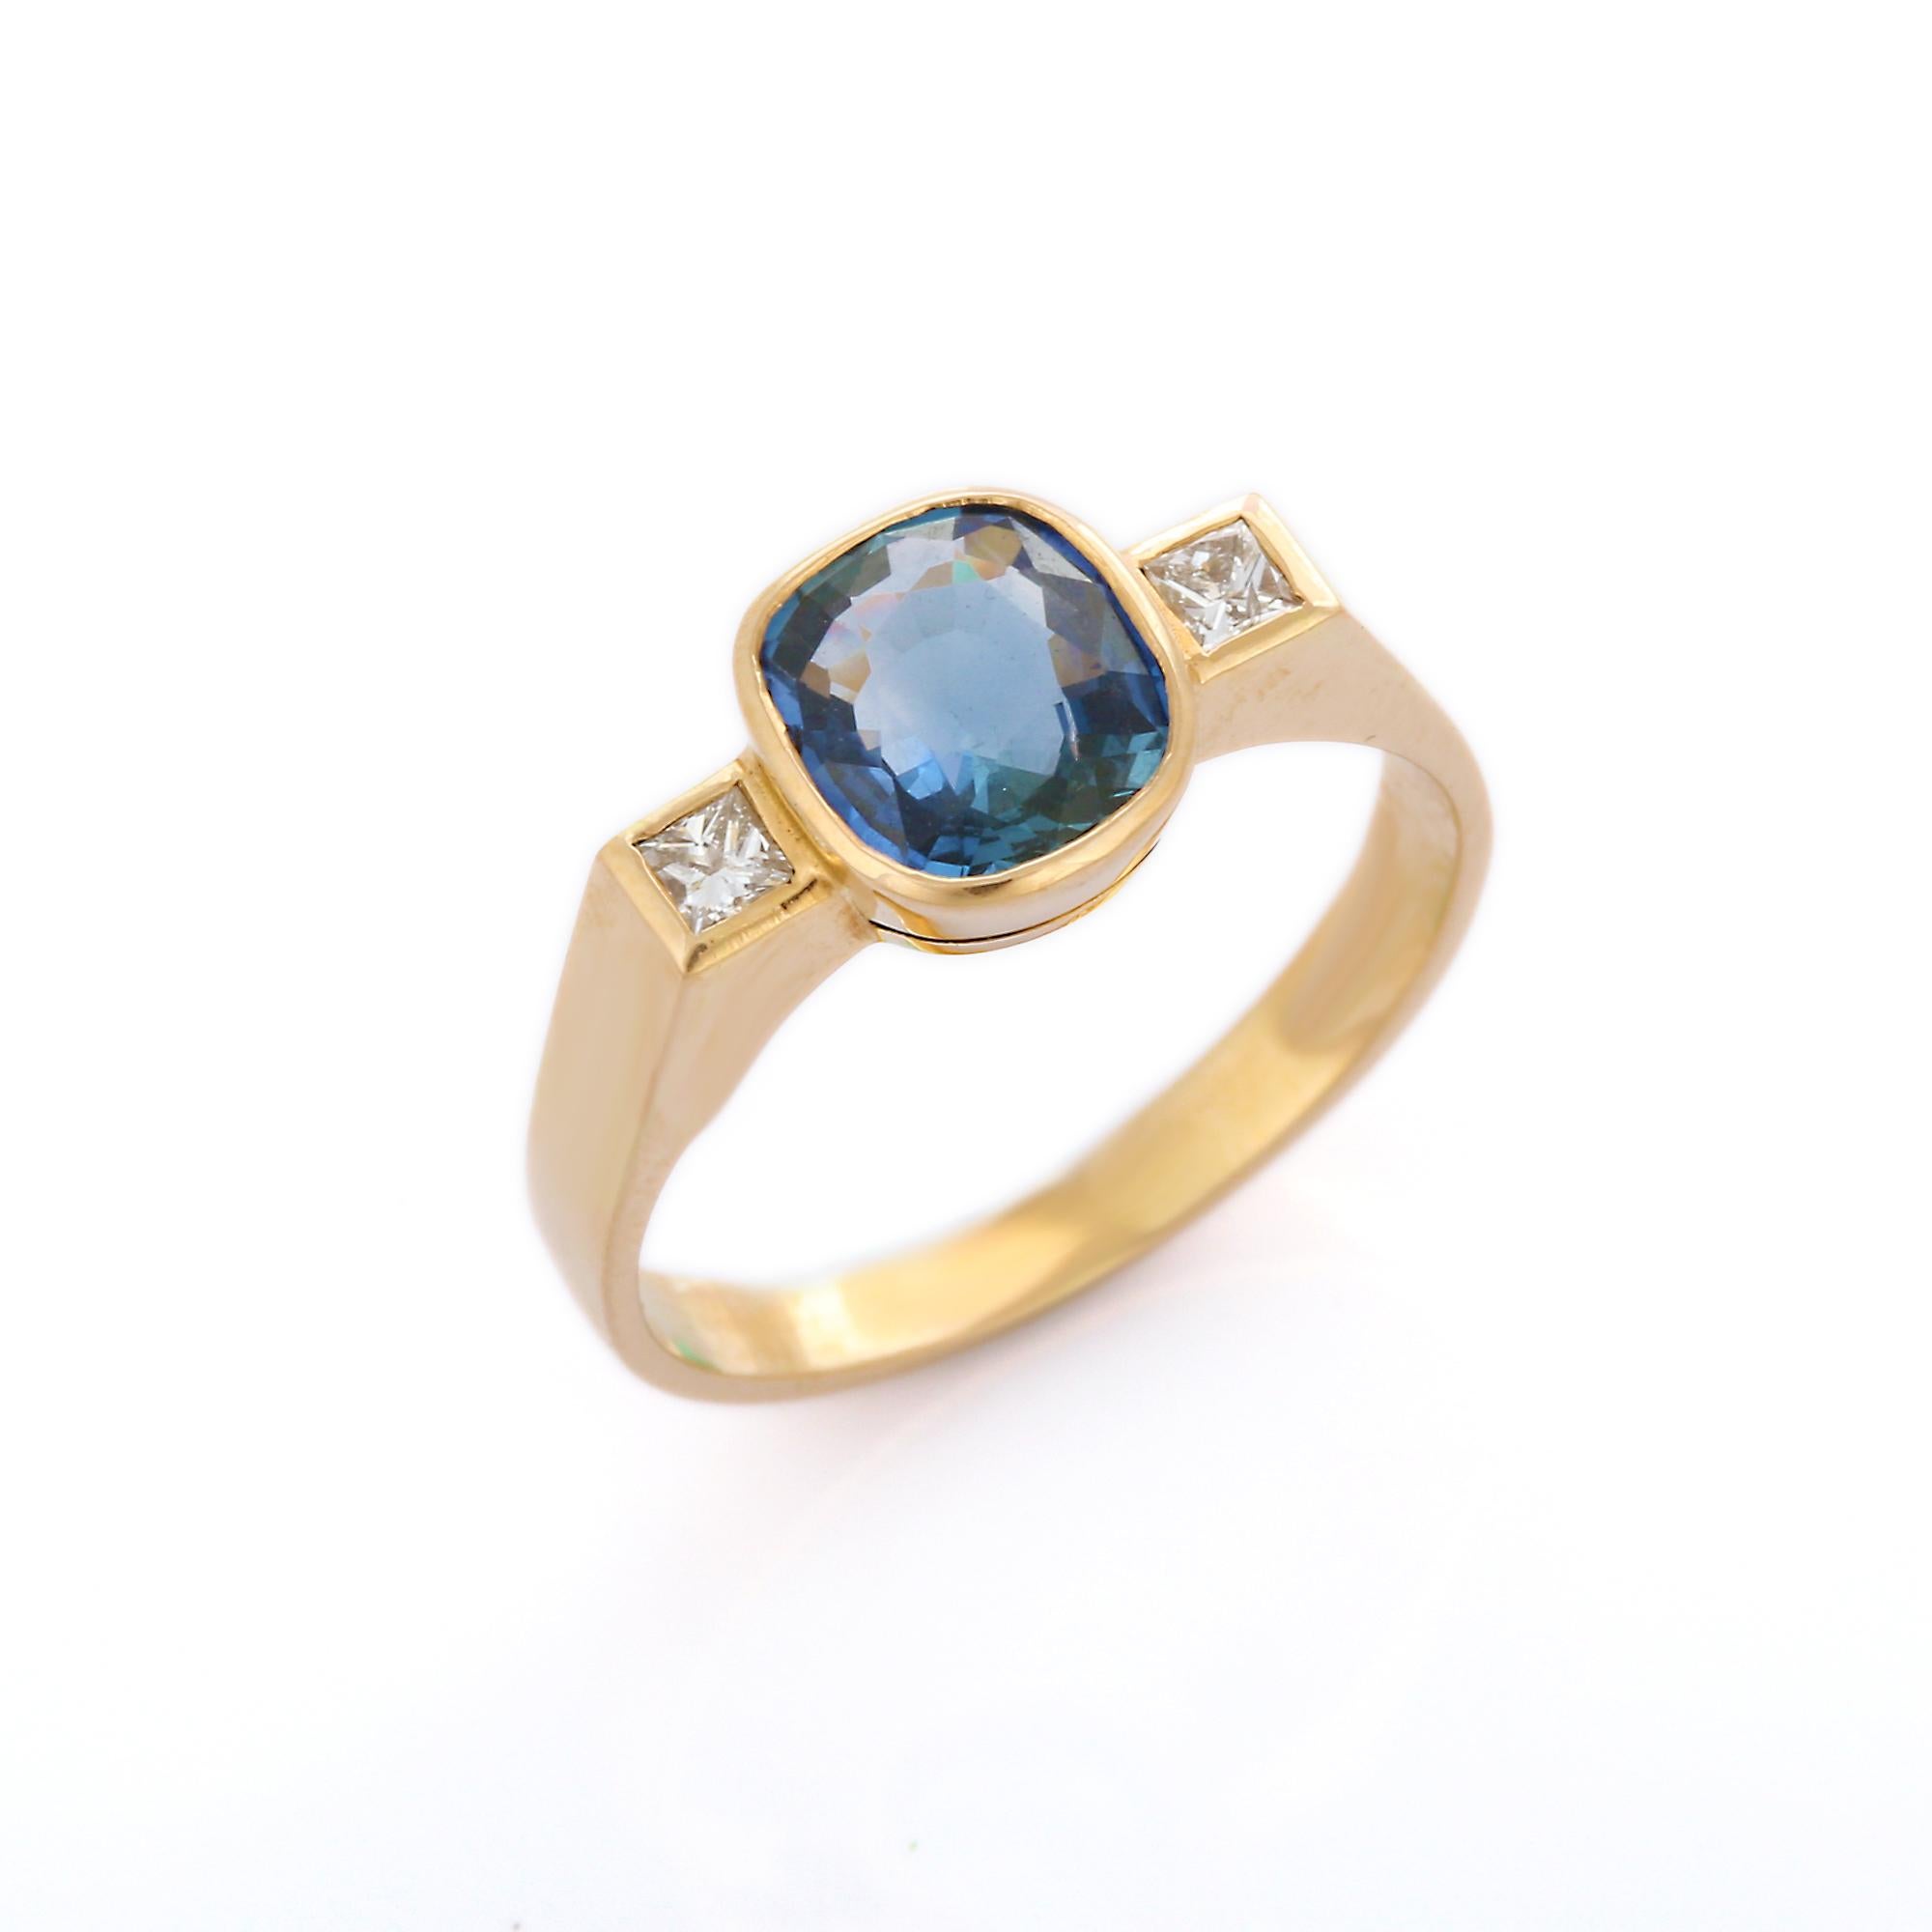 For Sale:  Blue Sapphire Diamond Three Stone Engagement Ring in 18K Yellow Gold 5